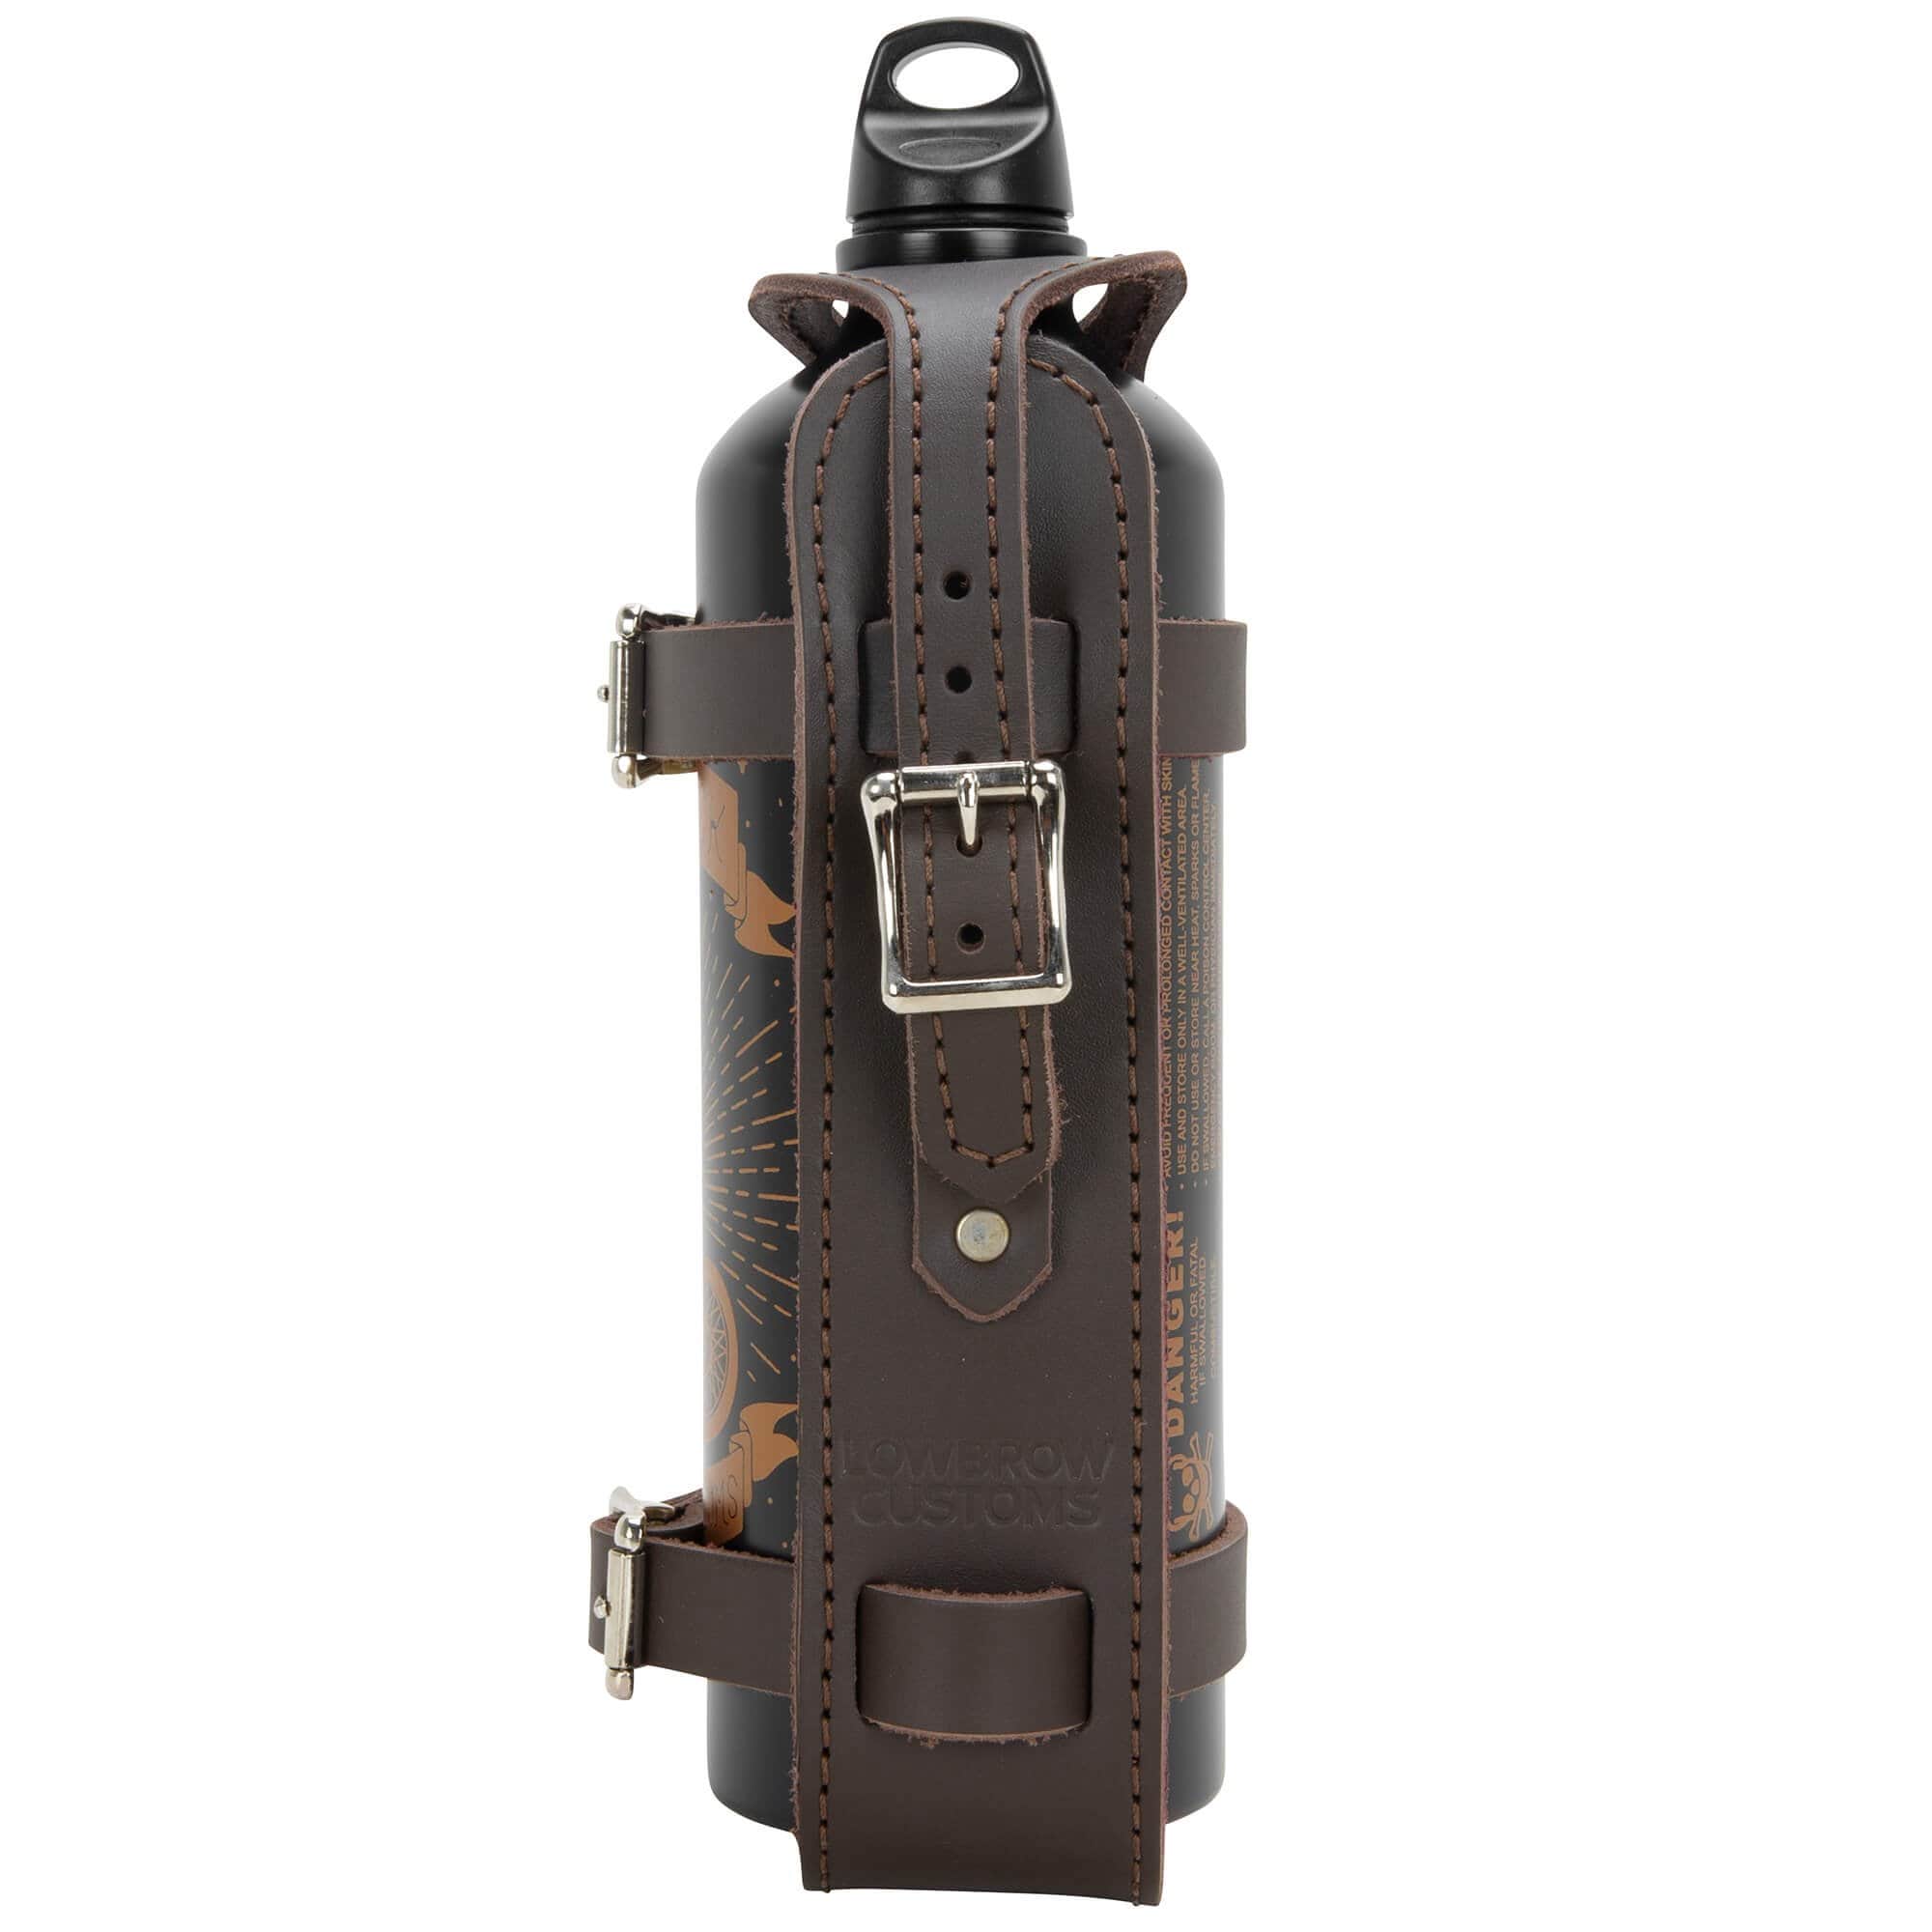 Lowbrow Customs Leather Fuel Reserve Bottle Carrier - Brown